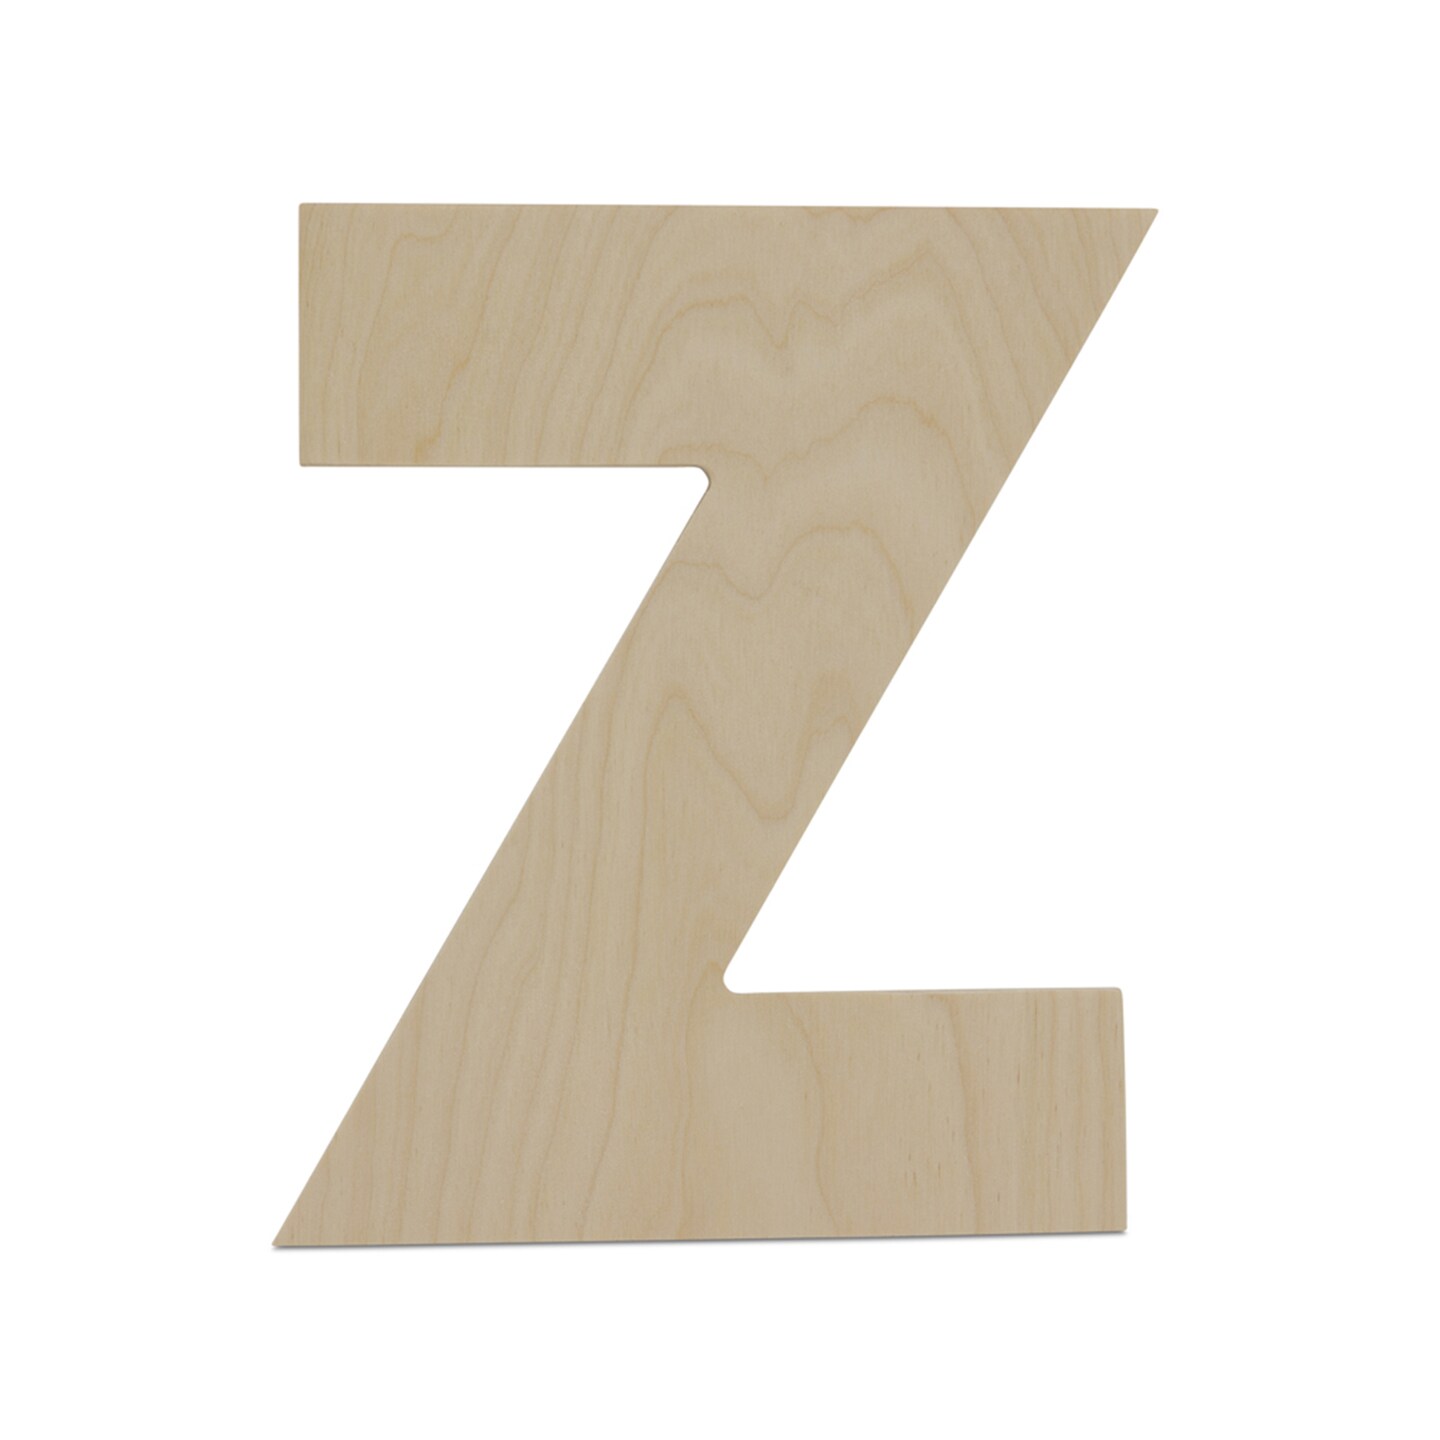 Wooden Letter Z 12 inch or 8 inch, Unfinished Large Wood Letters for Crafts | Woodpeckers